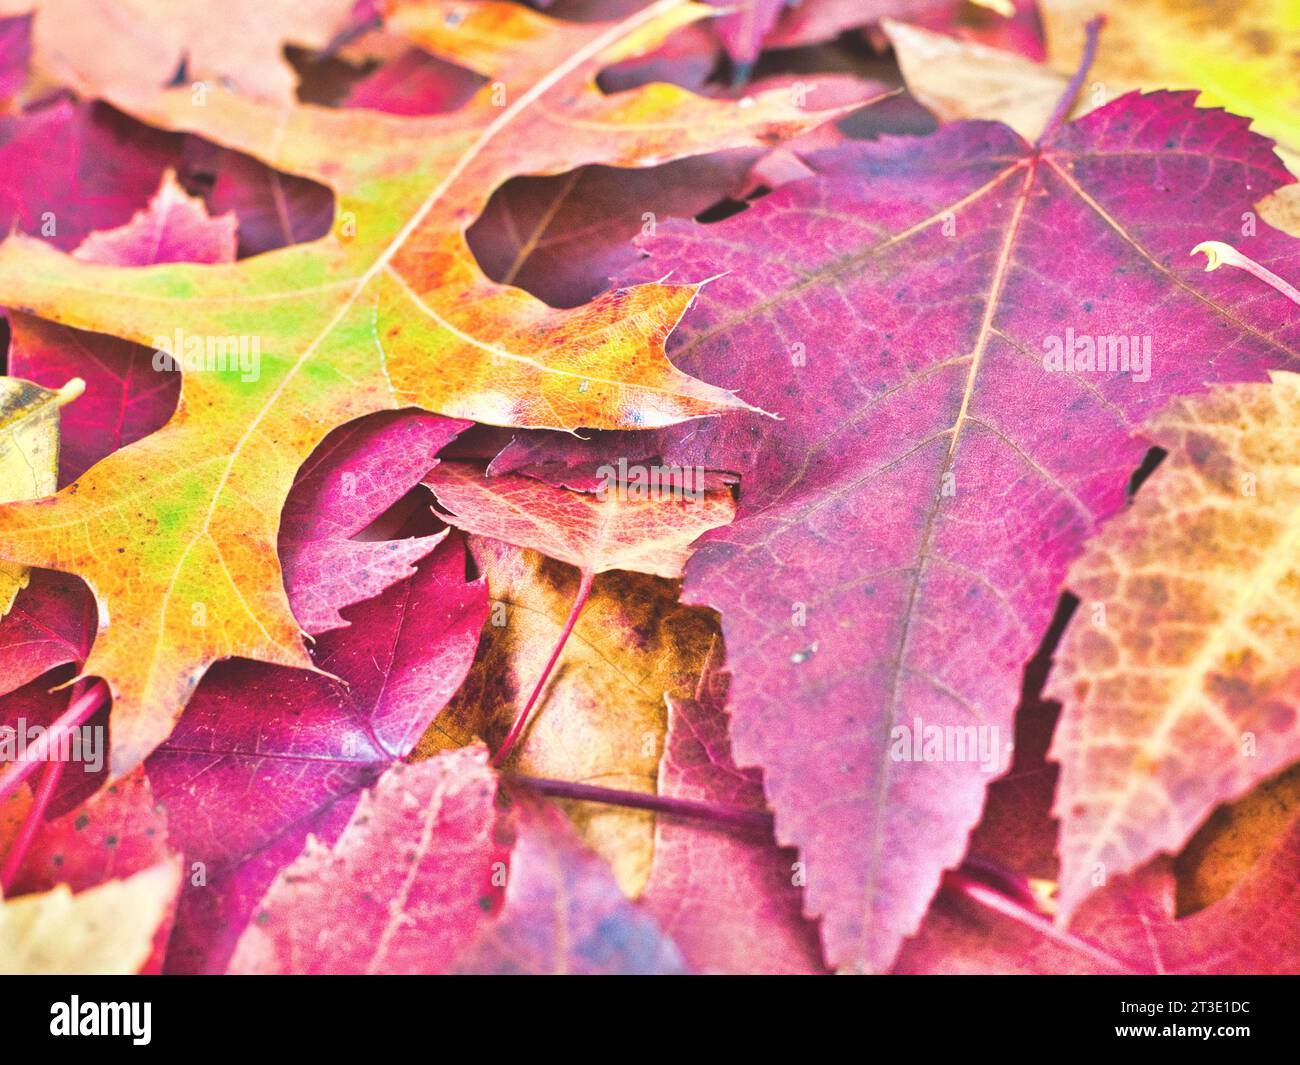 Colorful image of fallen autumn leaves on the sidewalk. Red and yellow maple and oak leaves for Halloween, Thanksgiving, autumn theme. Seattle, WA. Stock Photo